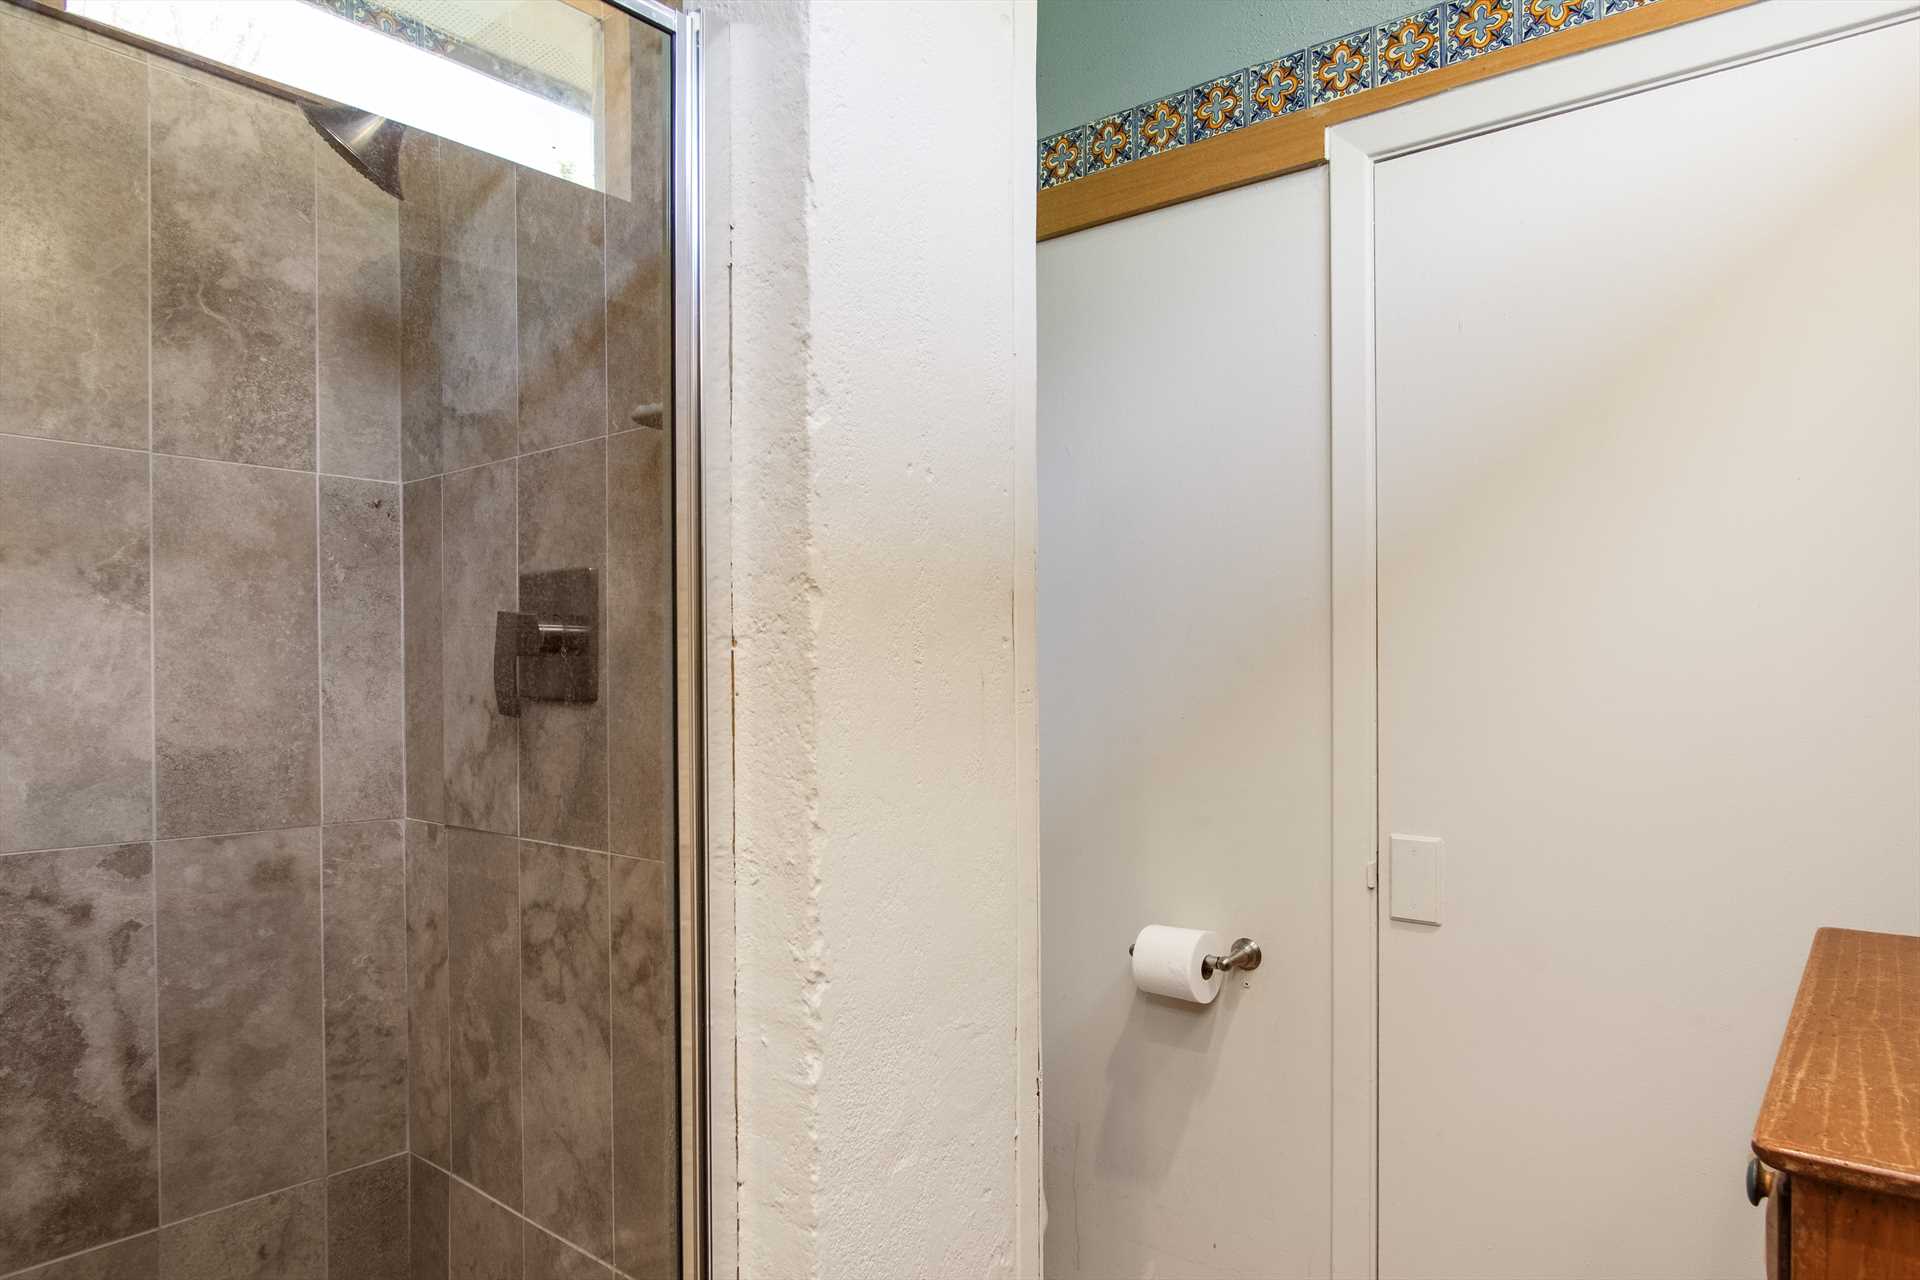                                                 A big and roomy shower stall makes for quality cleanup time in the second full bath!